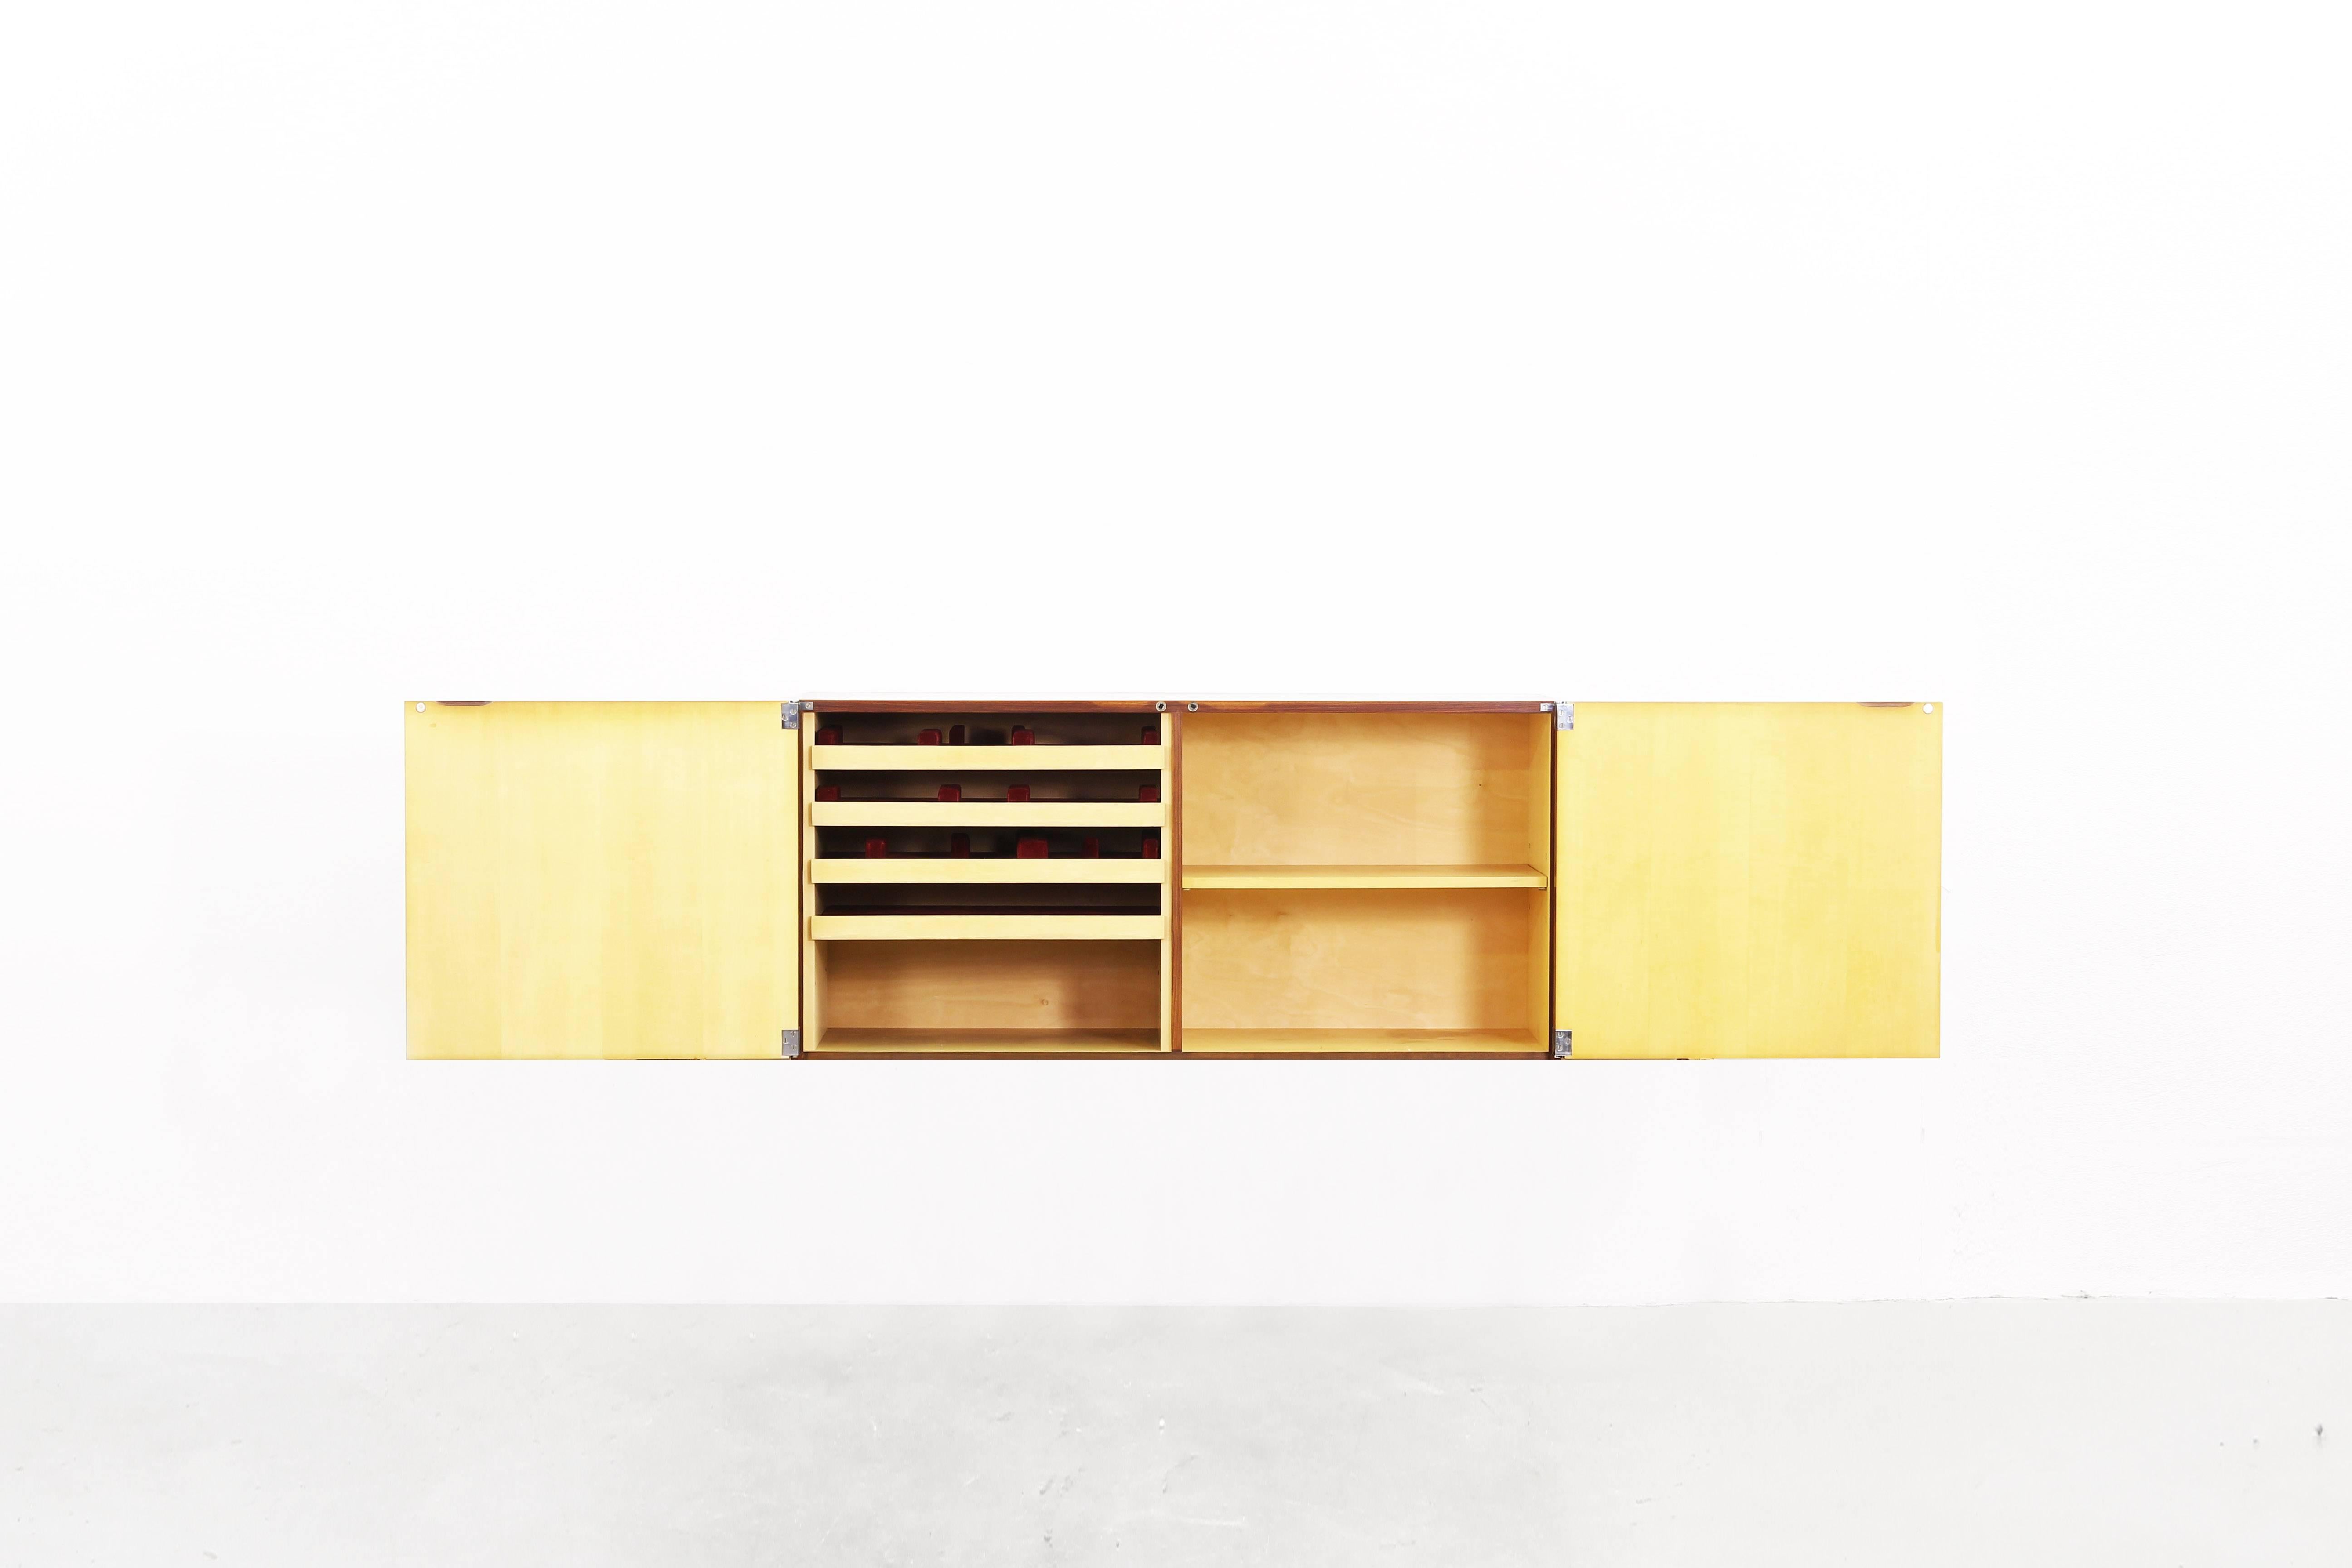 European Pair of Sideboard Wallboard by Antoine Philippon & Jacqueline Lecoq for Bofinger